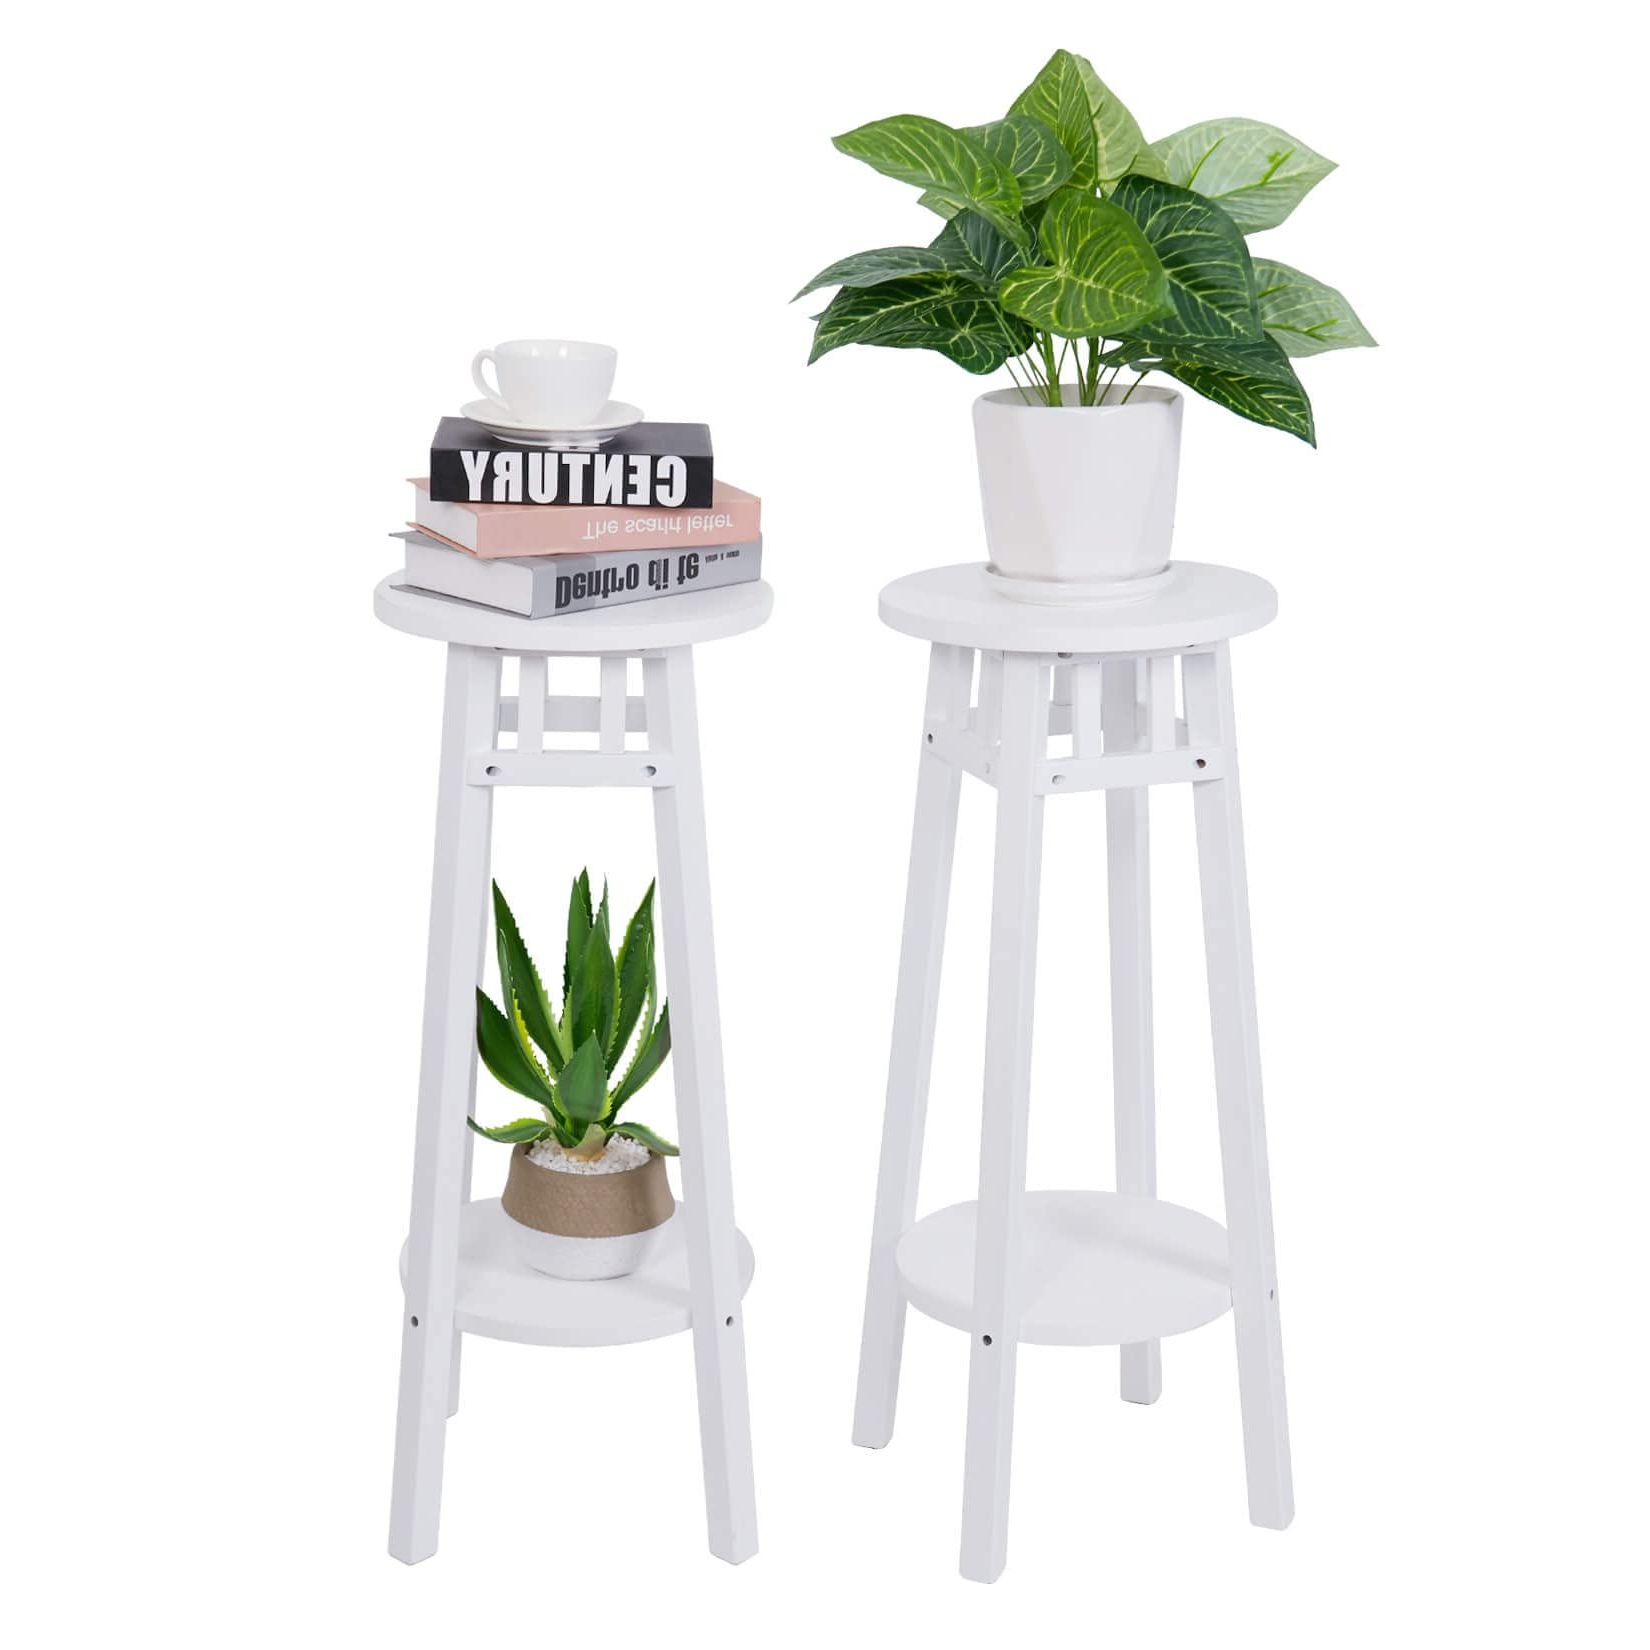 Famous 31 Inch Plant Stands With Amazon: Unho Wood Plant Stand White: 31 Inch Tall Round End Table With  2 Tier Shelves Home Furnishing Modern Side Desk Indoor For Living Room  Window Balcony Entryway Patio Garden Décor ( (View 4 of 10)